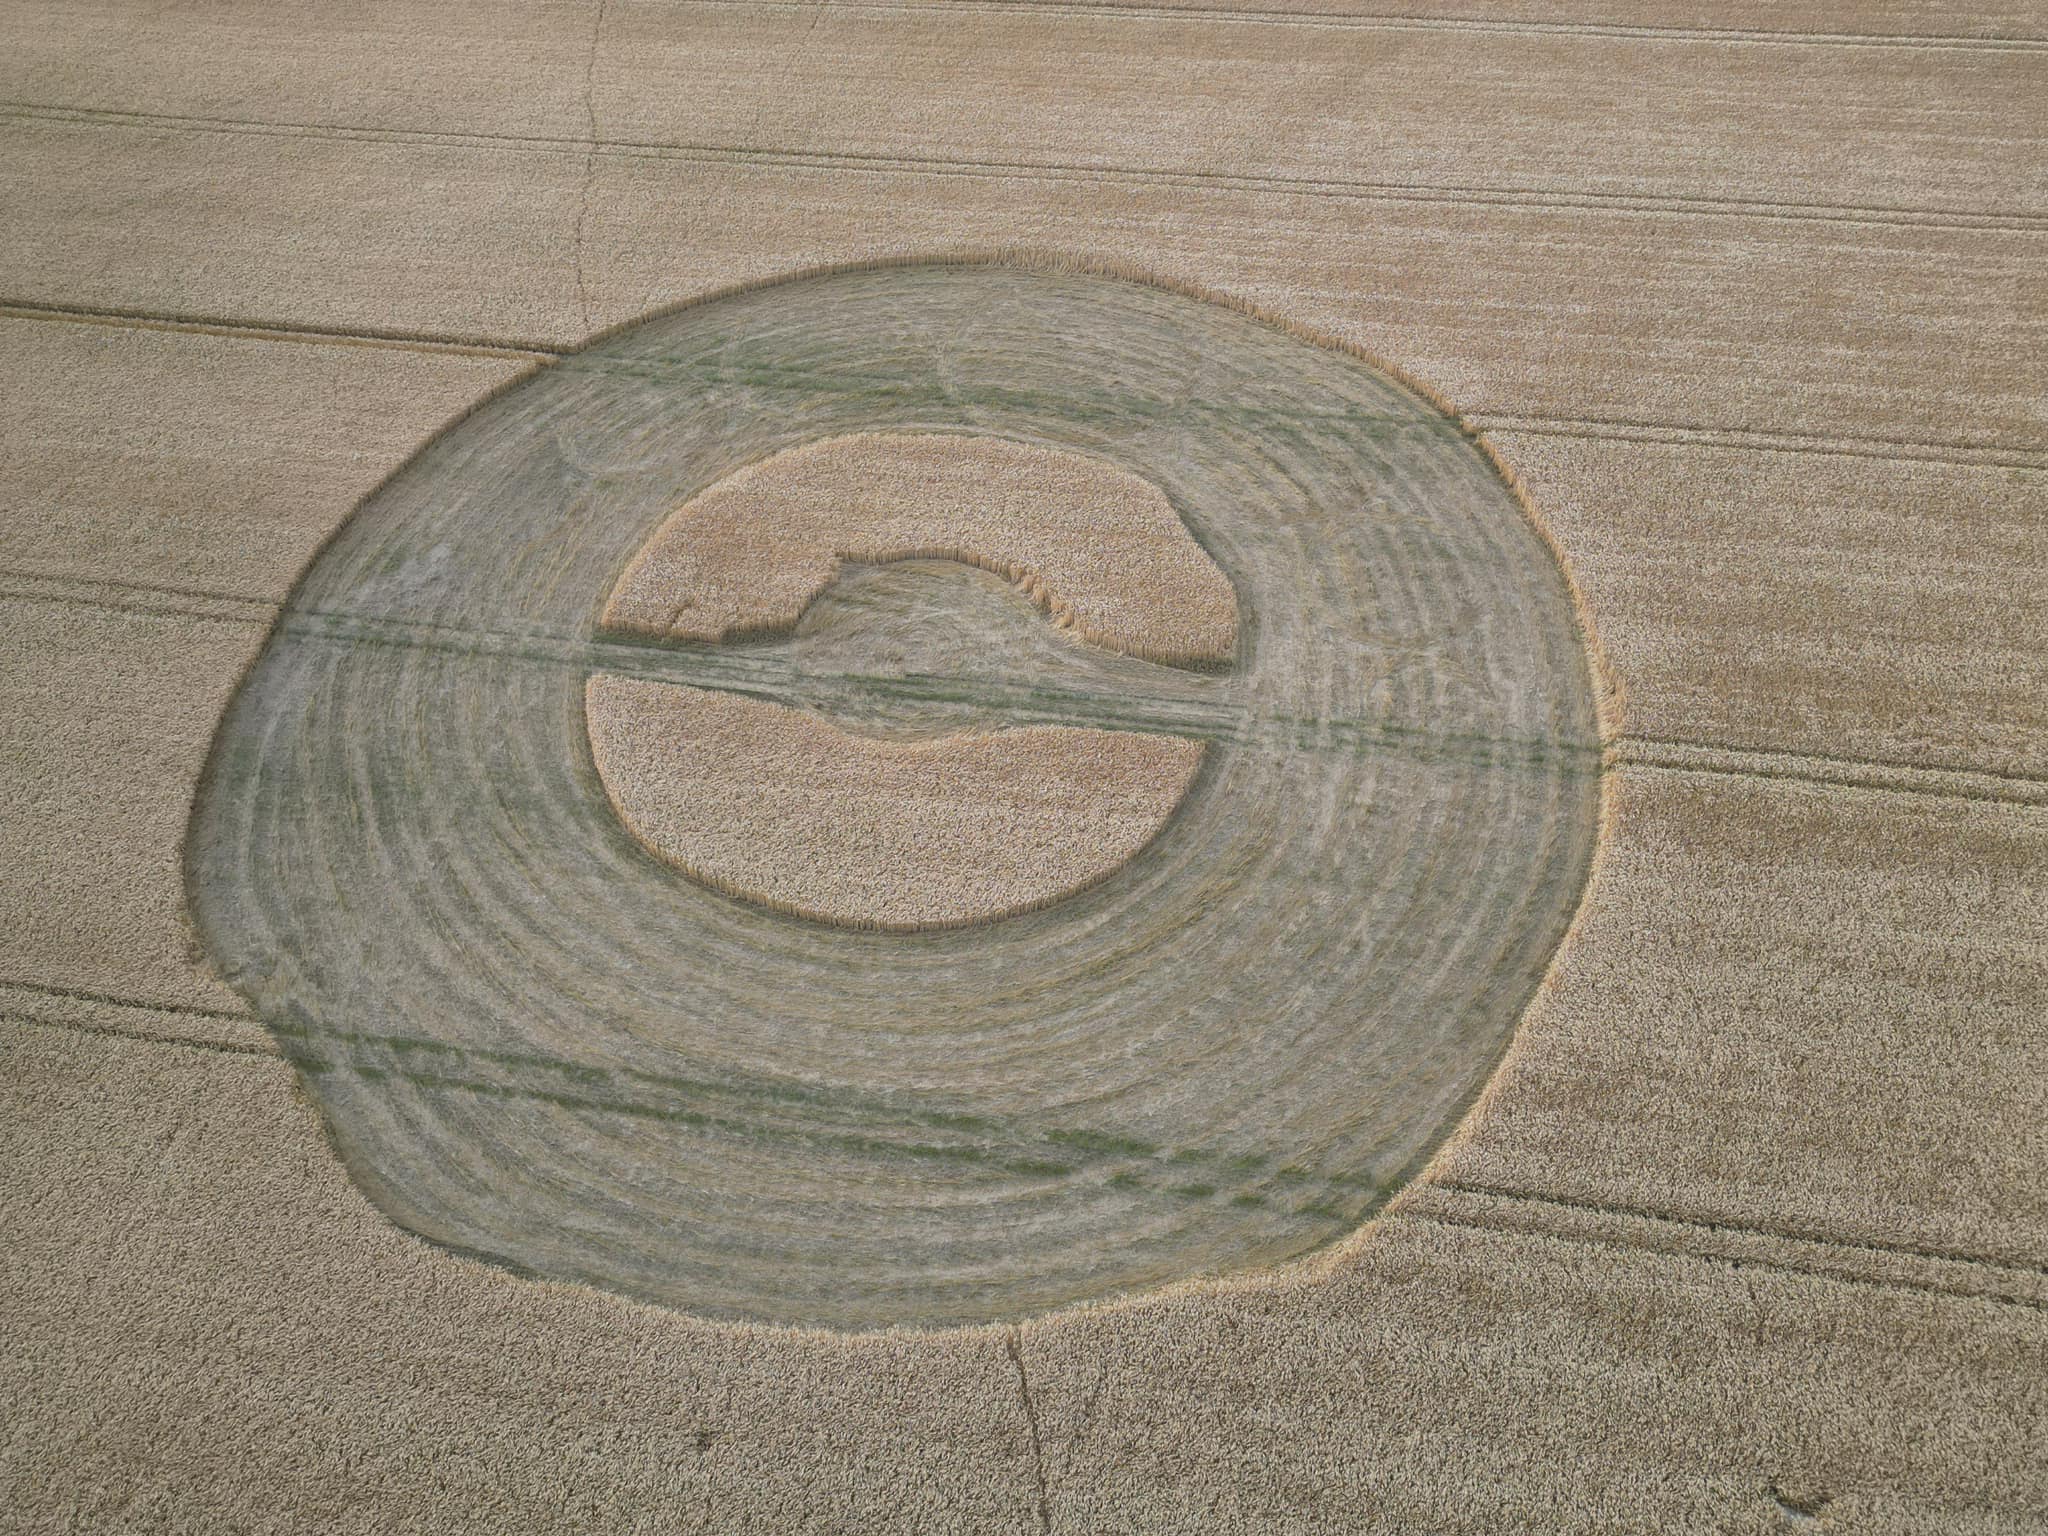 A color photograph exactly like the previous photograph taken from an aerial view of a crop circle in the shape of a lumpy wide ring of flattened crop where several rings are visible within the flattened part with a center lumpy circle of upright crop. The circle of upright grass is divided by an off-center horizontal line of flattened crop with a small circle of flattened crop at the center. 3 evenly spaced sets of 2 lines are visible through the crop circle and in the field surrounding the crop circle.